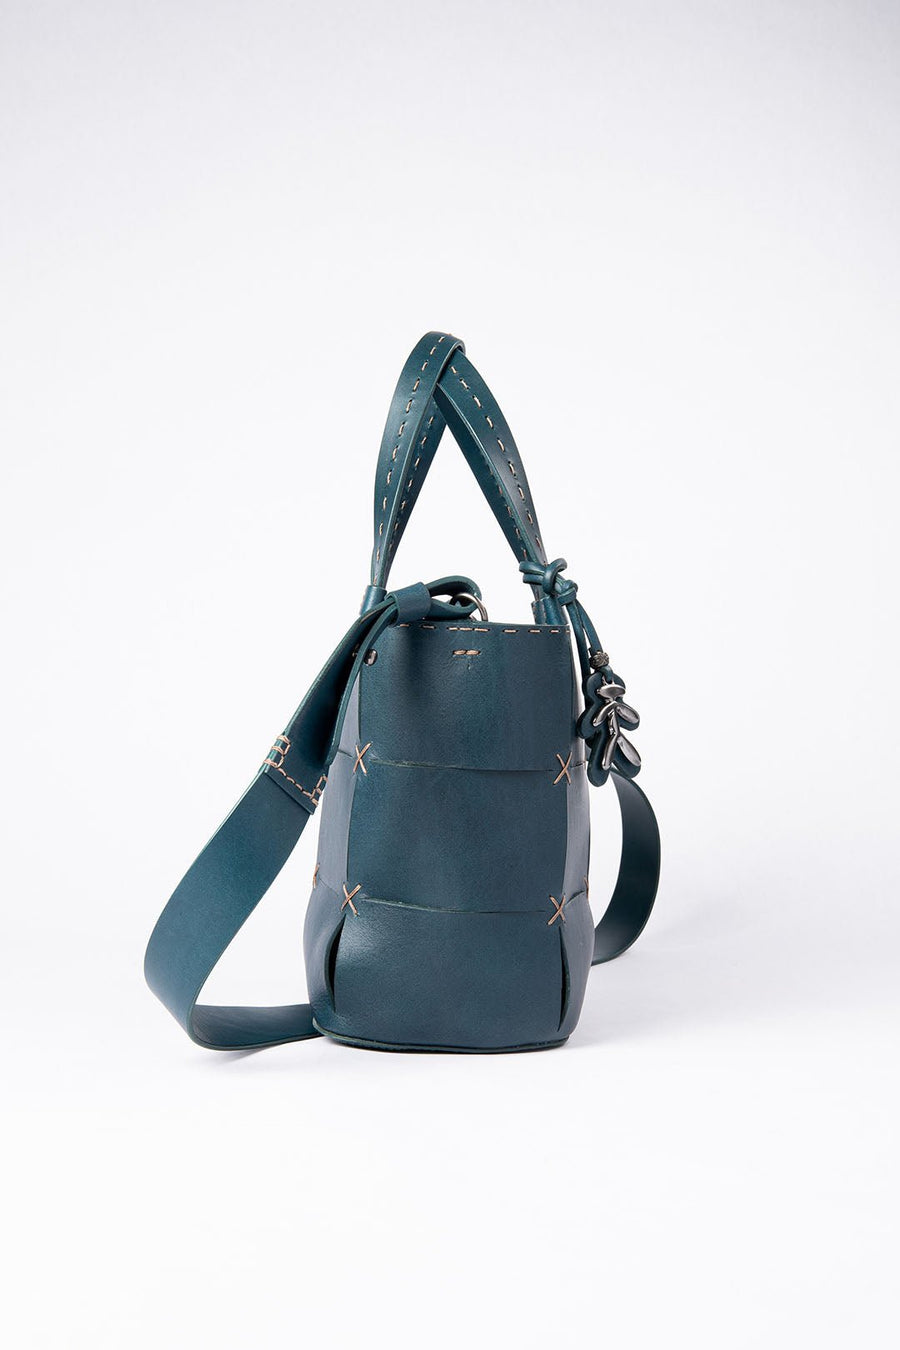 HENRY BEGUELIN PATCHWORK LEATHER BAG, TURQUOISE - Burning Torch Online Boutique